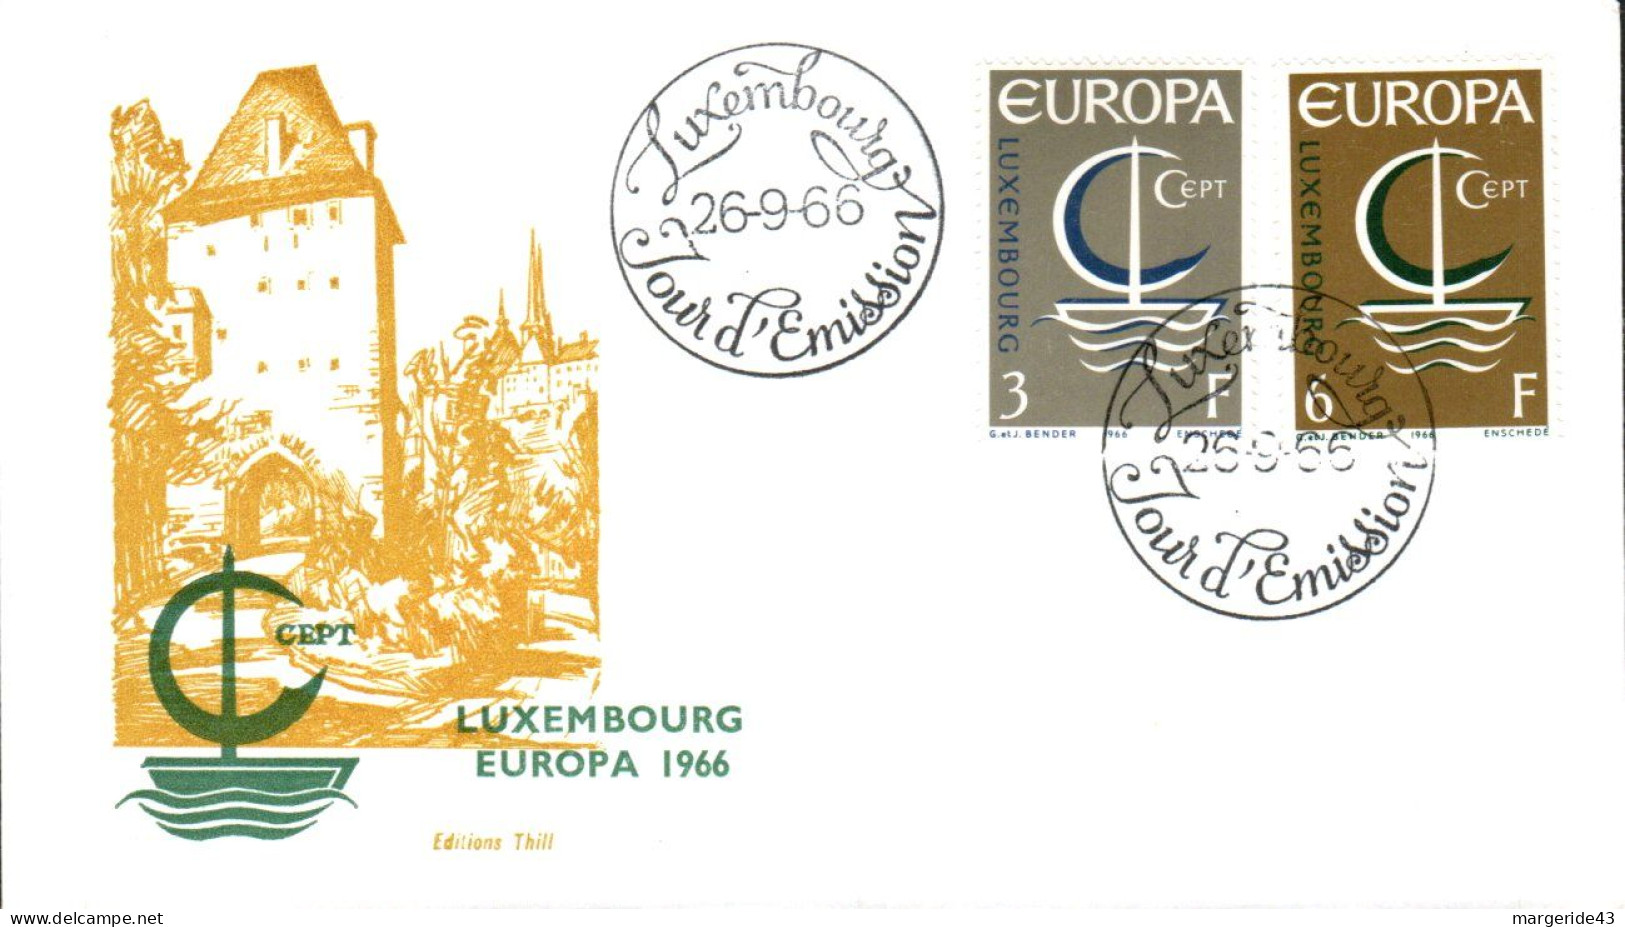 EUROPA 1966 LUXEMBOURG FDC - 1966